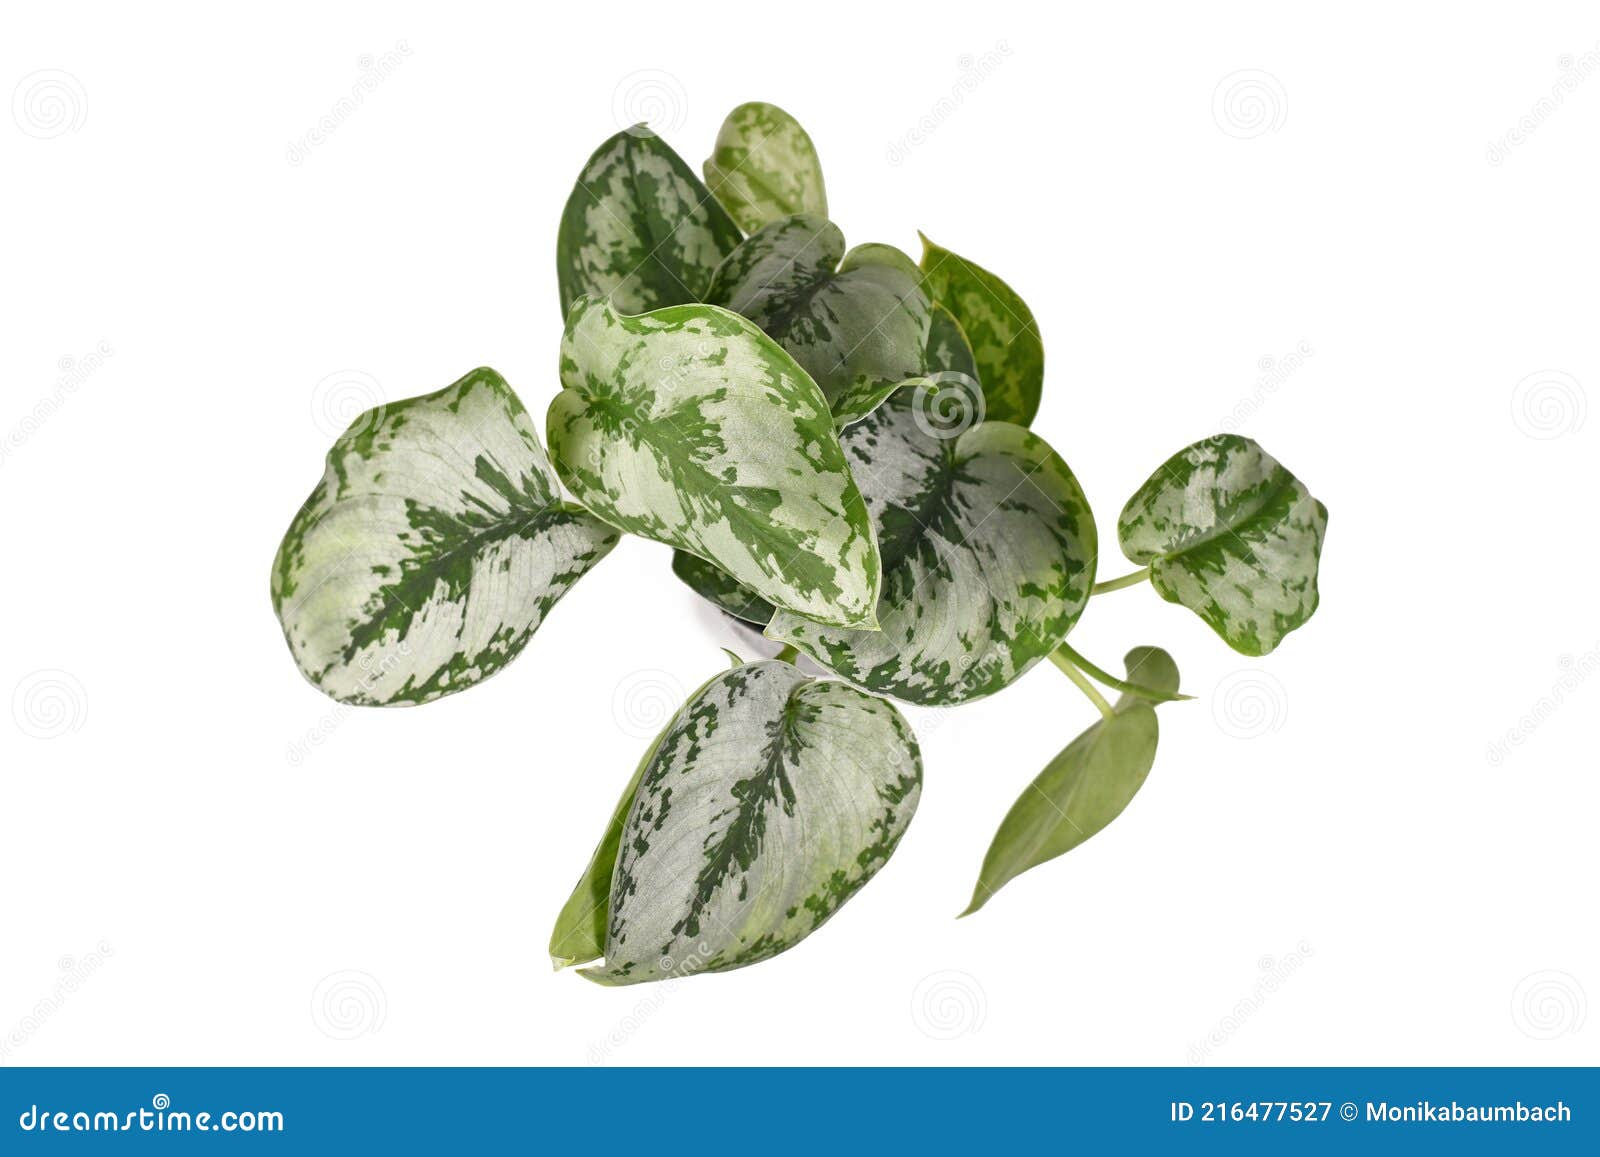 top view of tropical `scindapsus pictus exotica` or `satin pothos` houseplant with large silver leaves with velvet texture